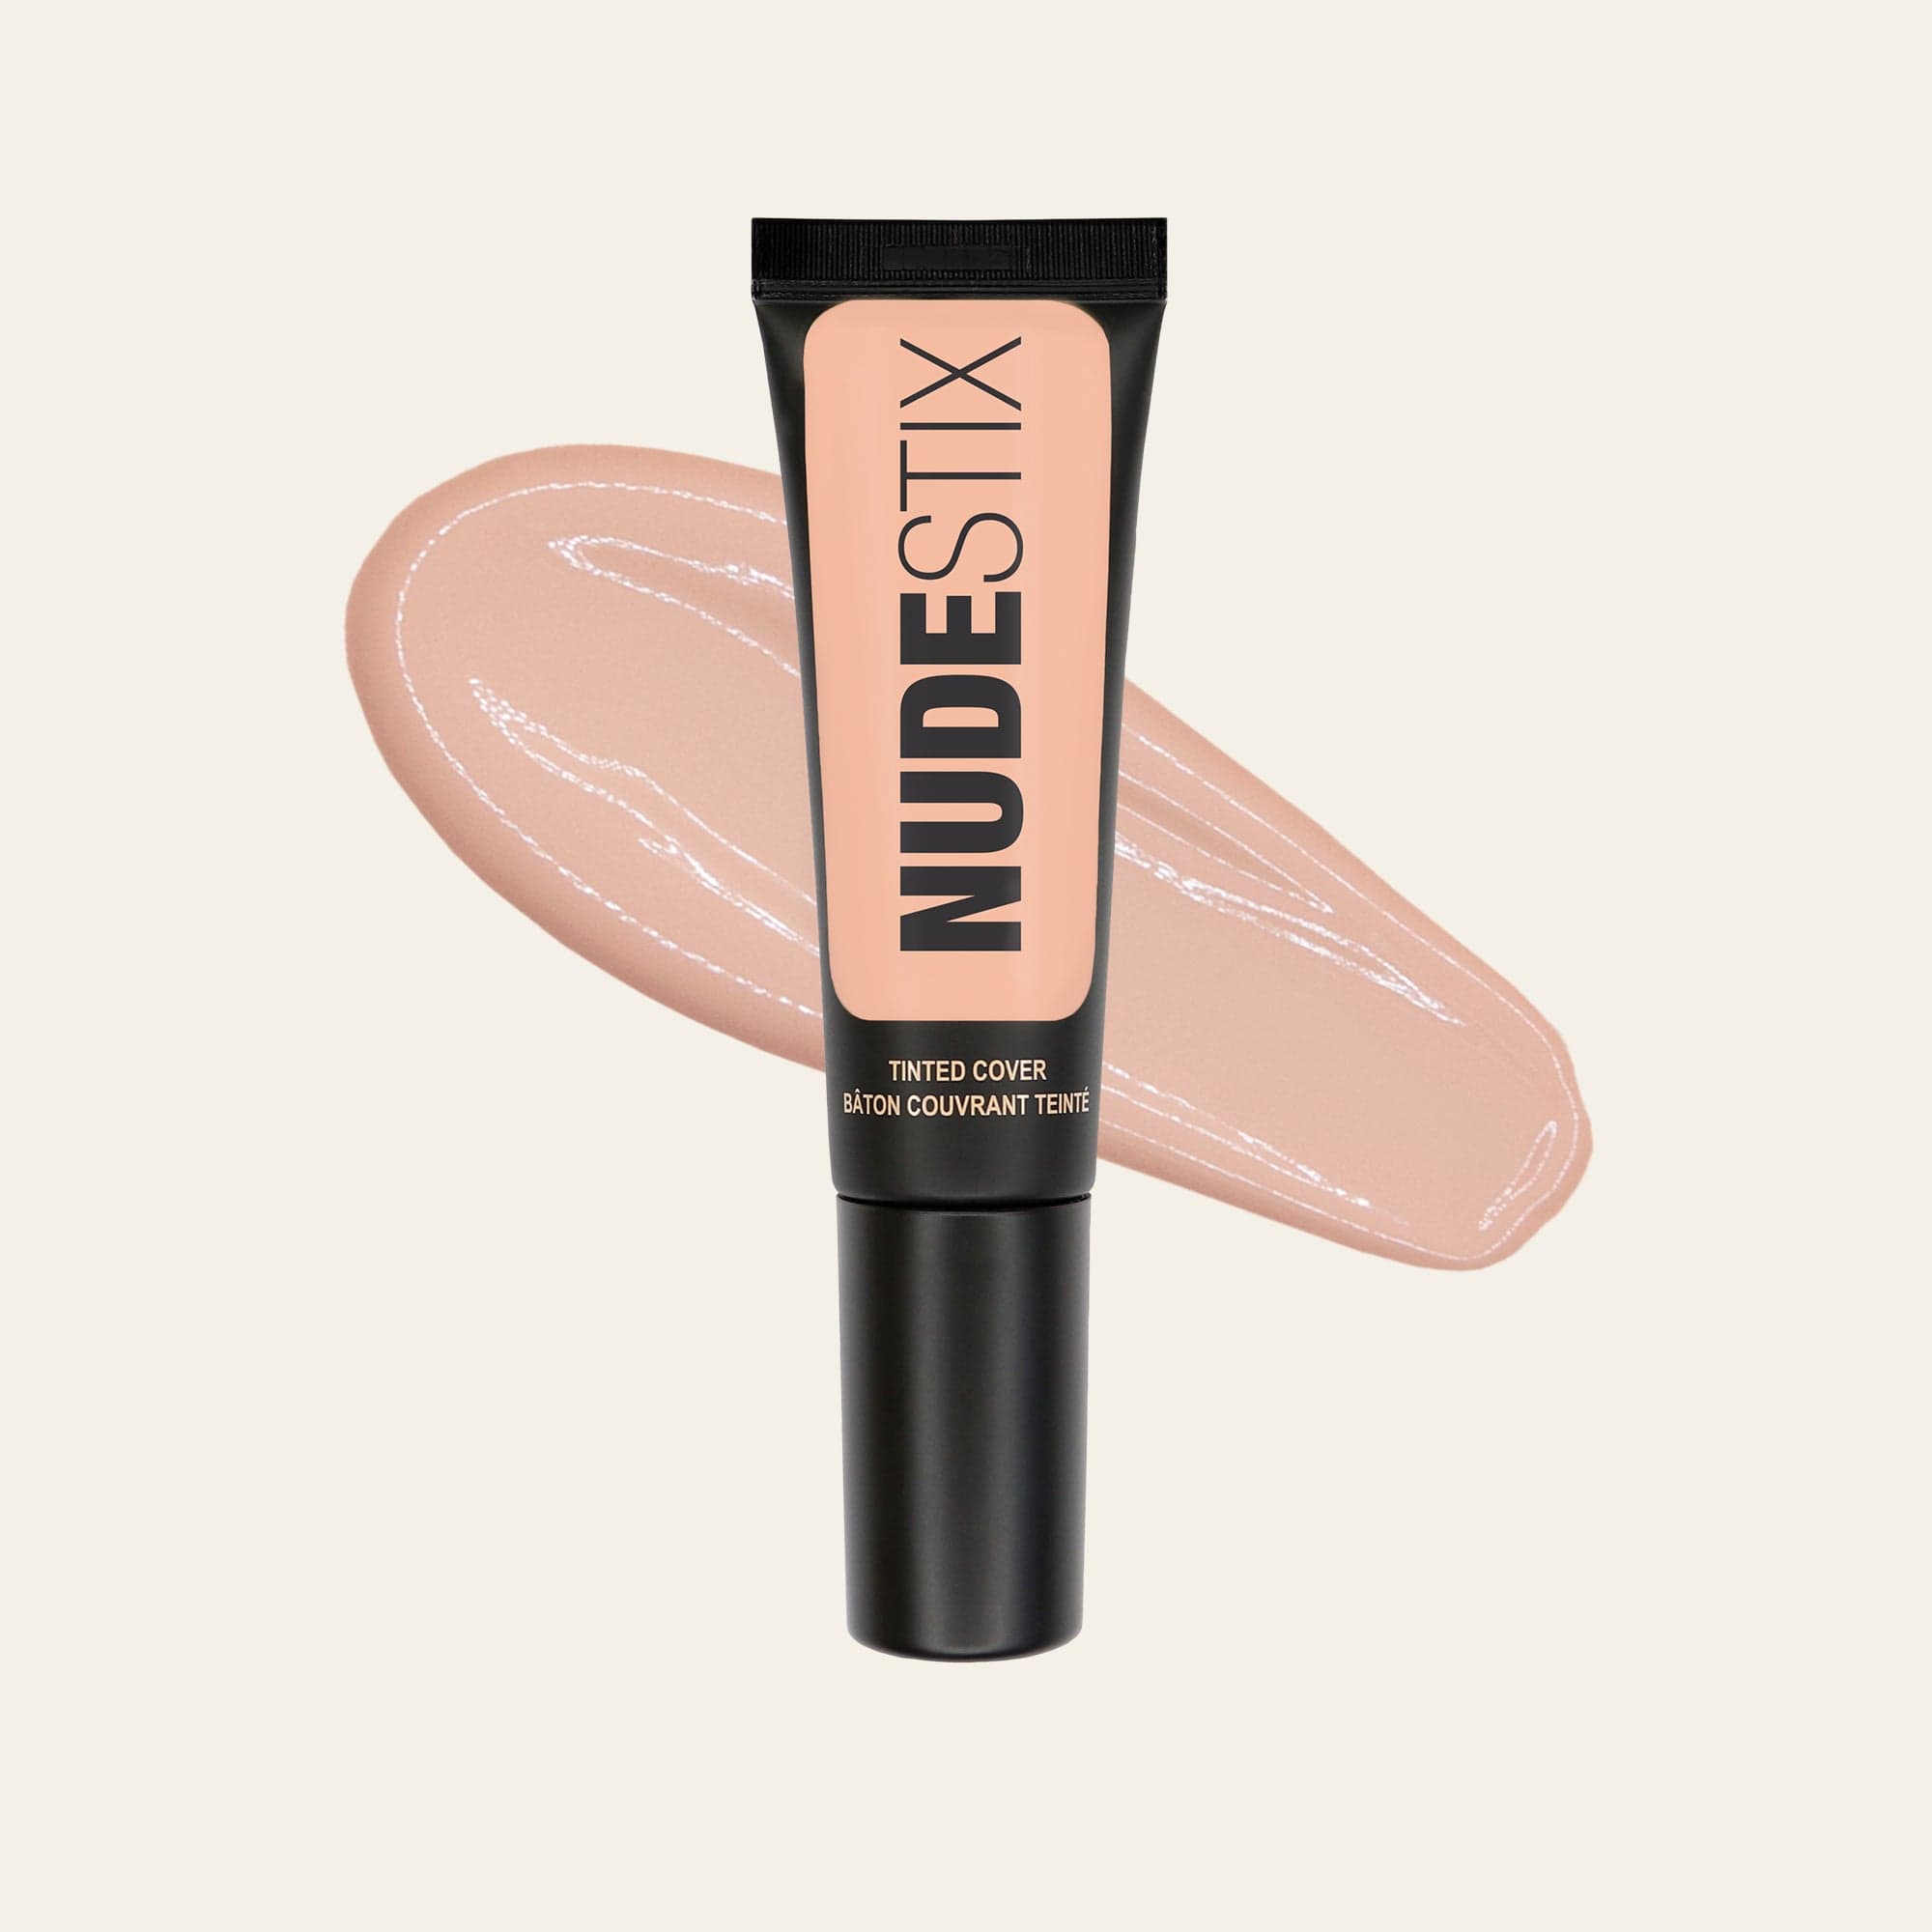 Tinted Cover Liquid Foundation in shade Nude 2.5